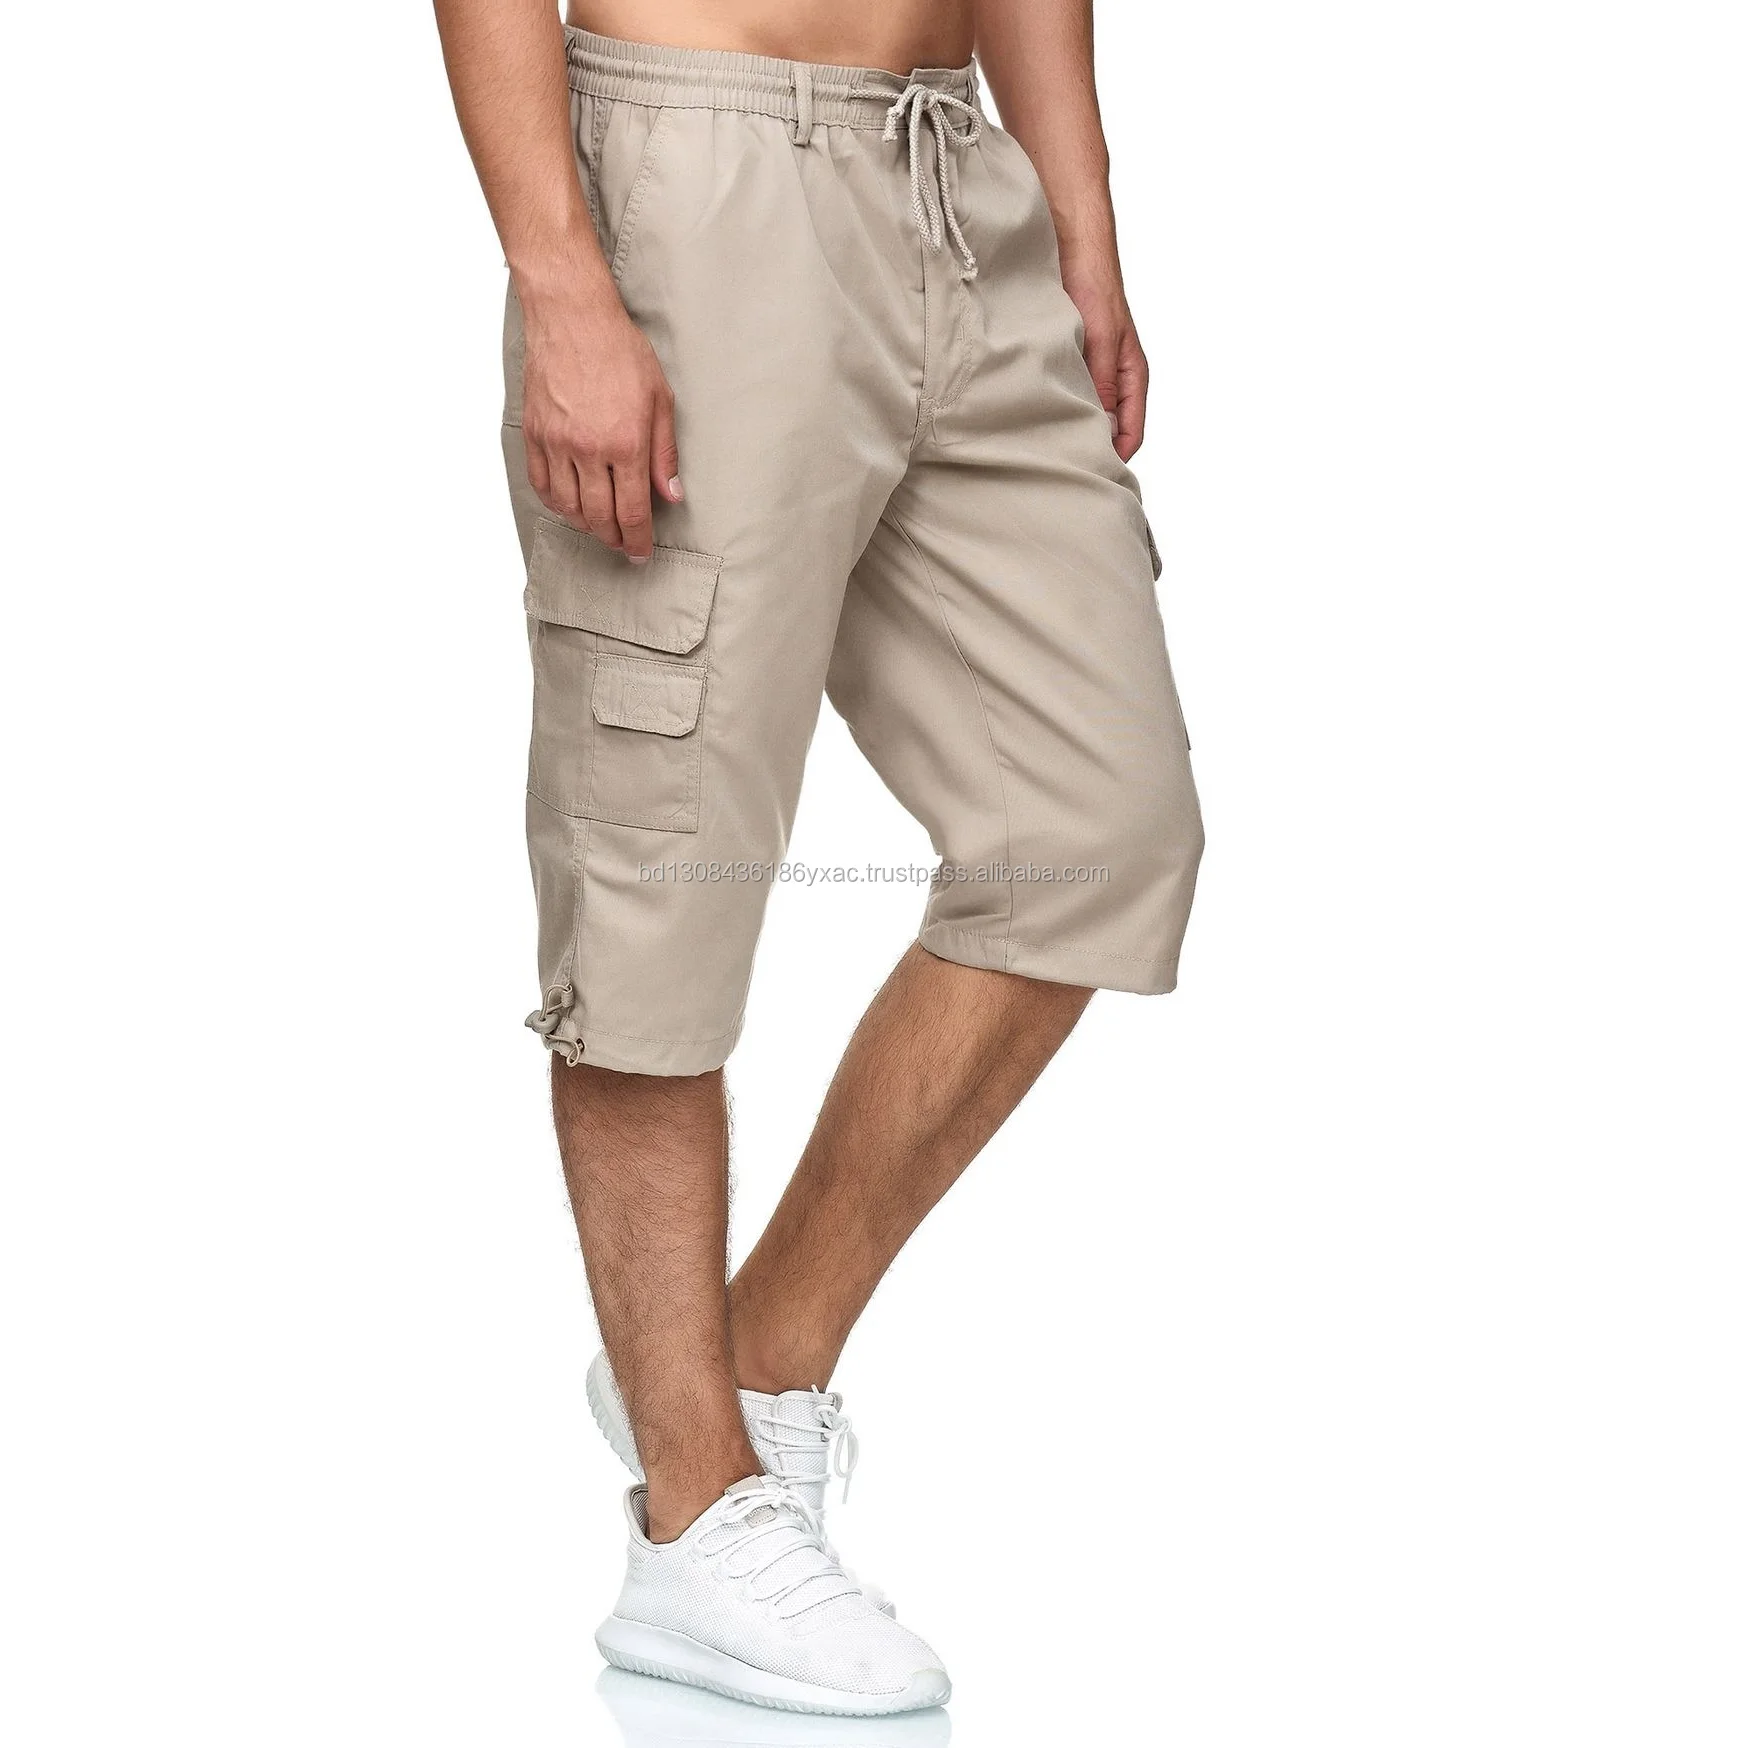 Gents Three Quarters Pants Suppliers 18148223  Wholesale Manufacturers and  Exporters